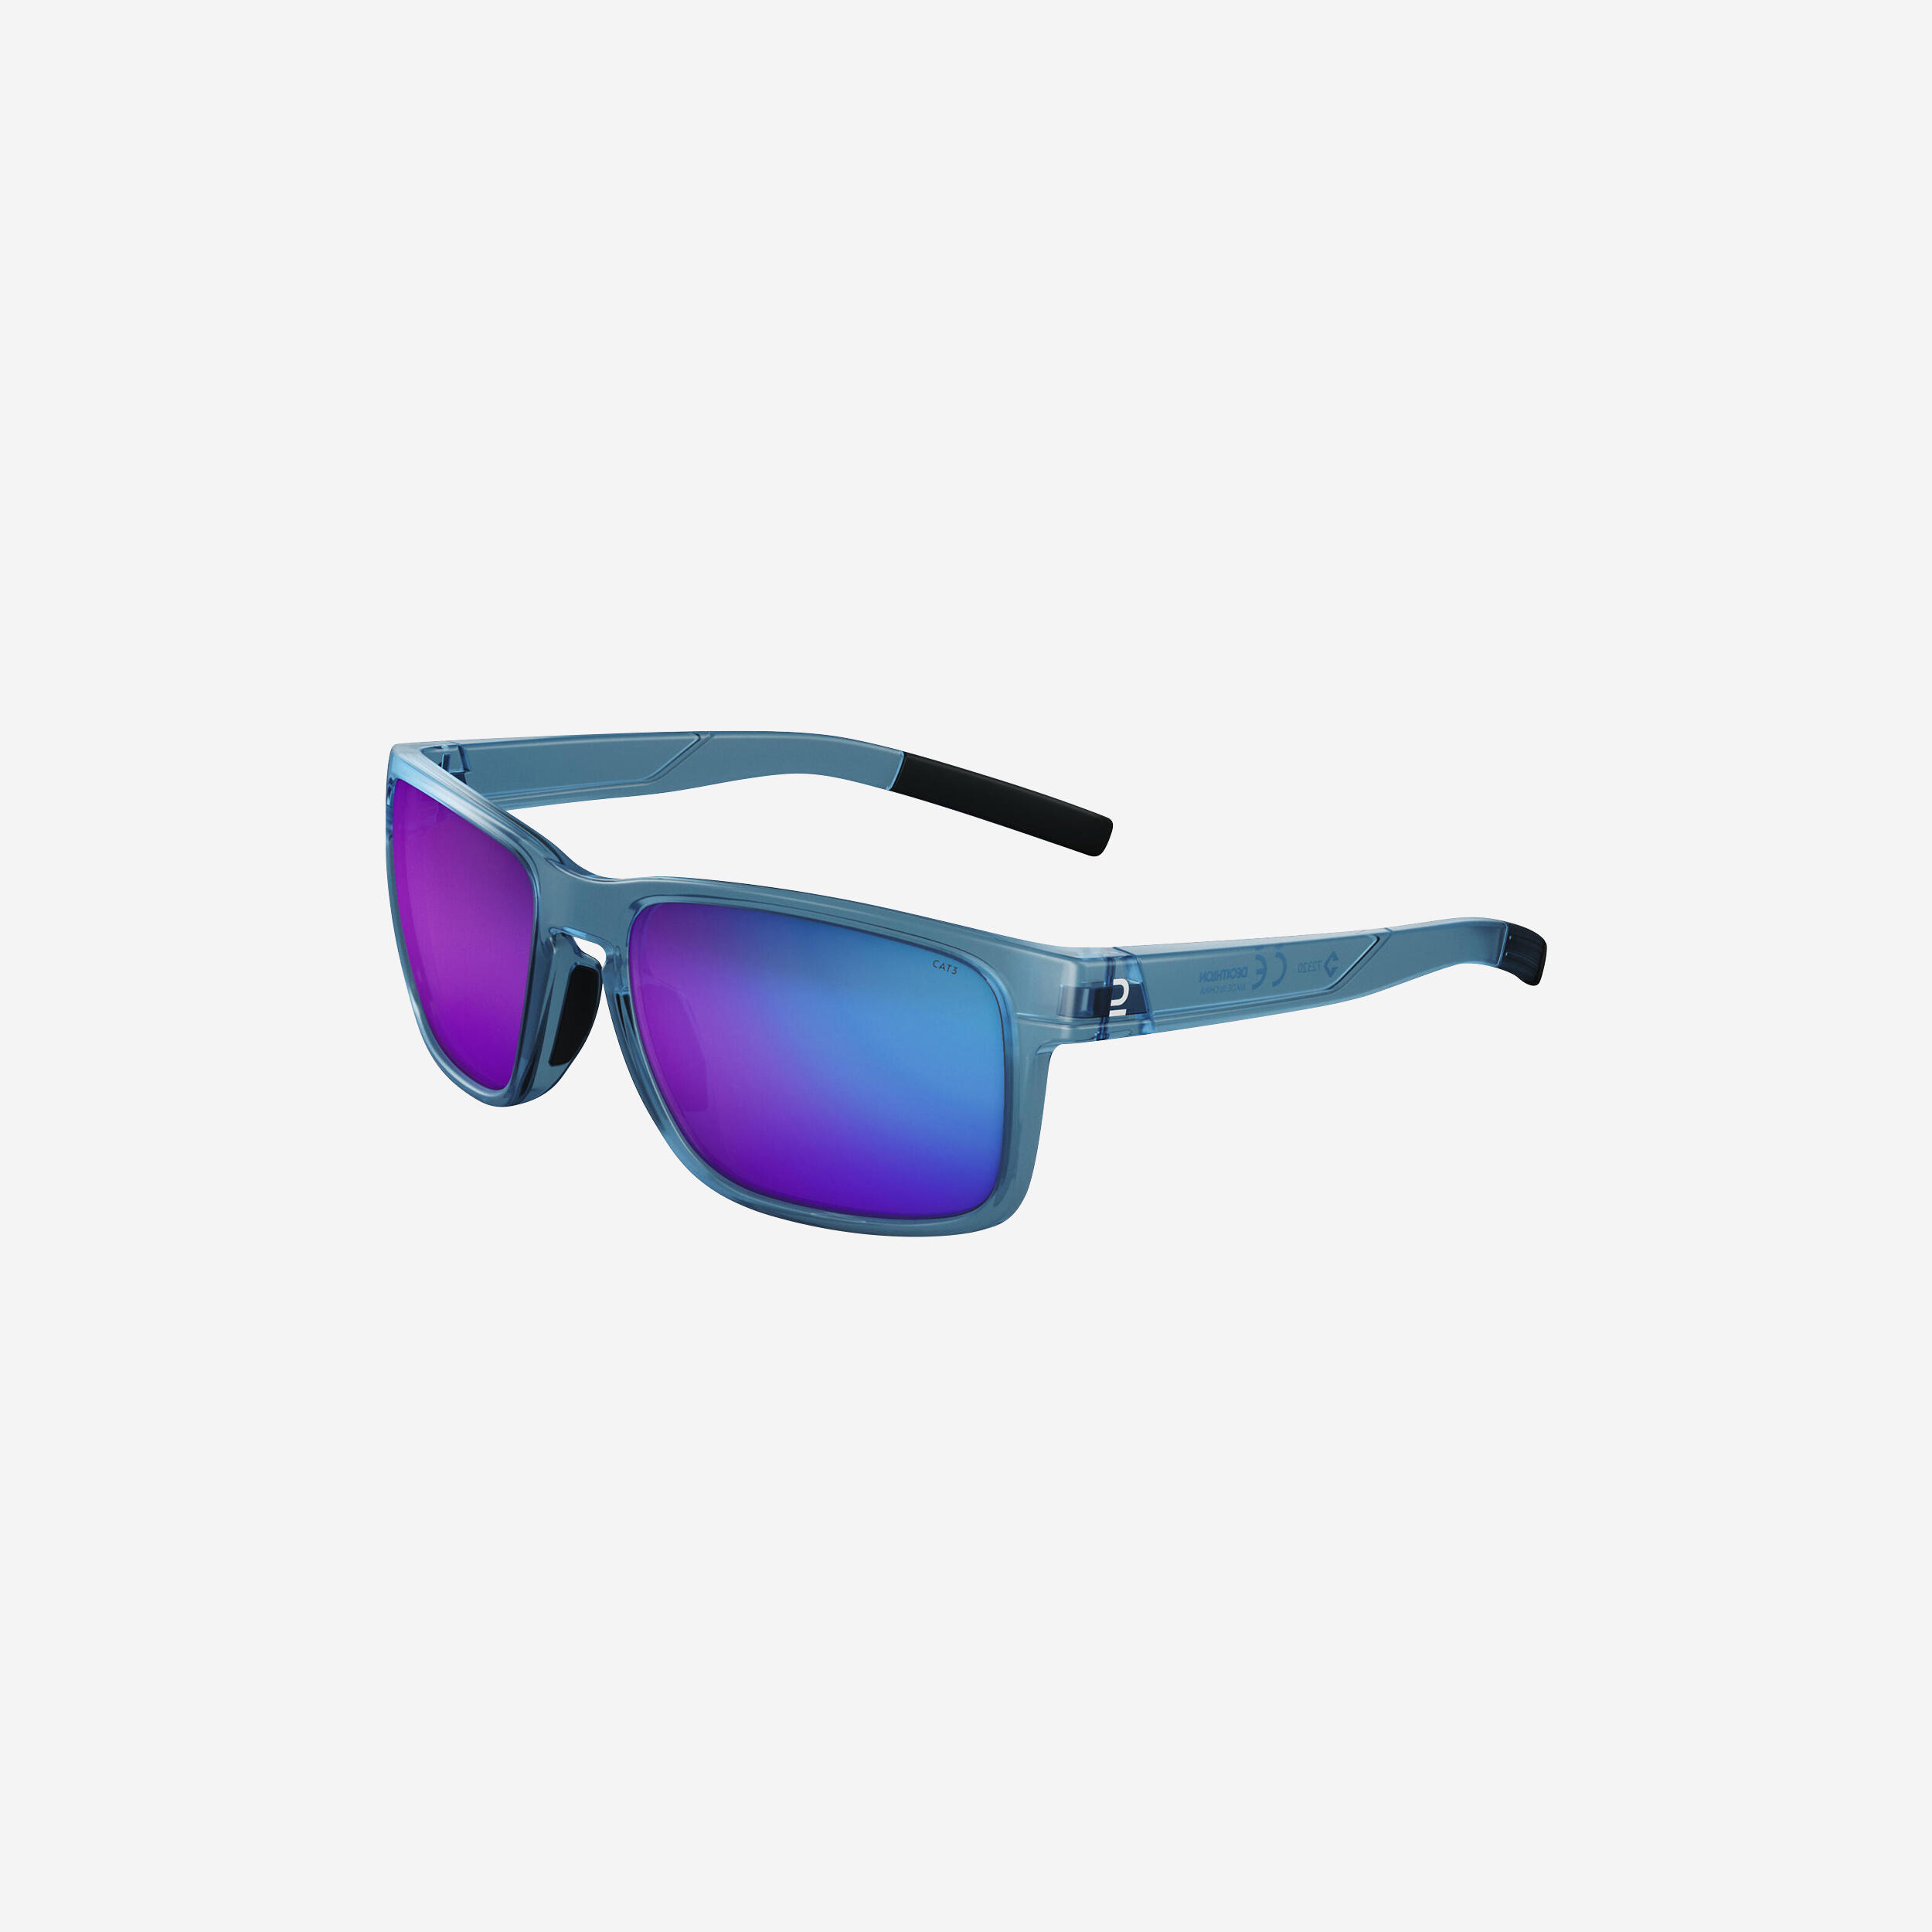 QUECHUA Adult hiking sunglasses – MH530 – Category 3